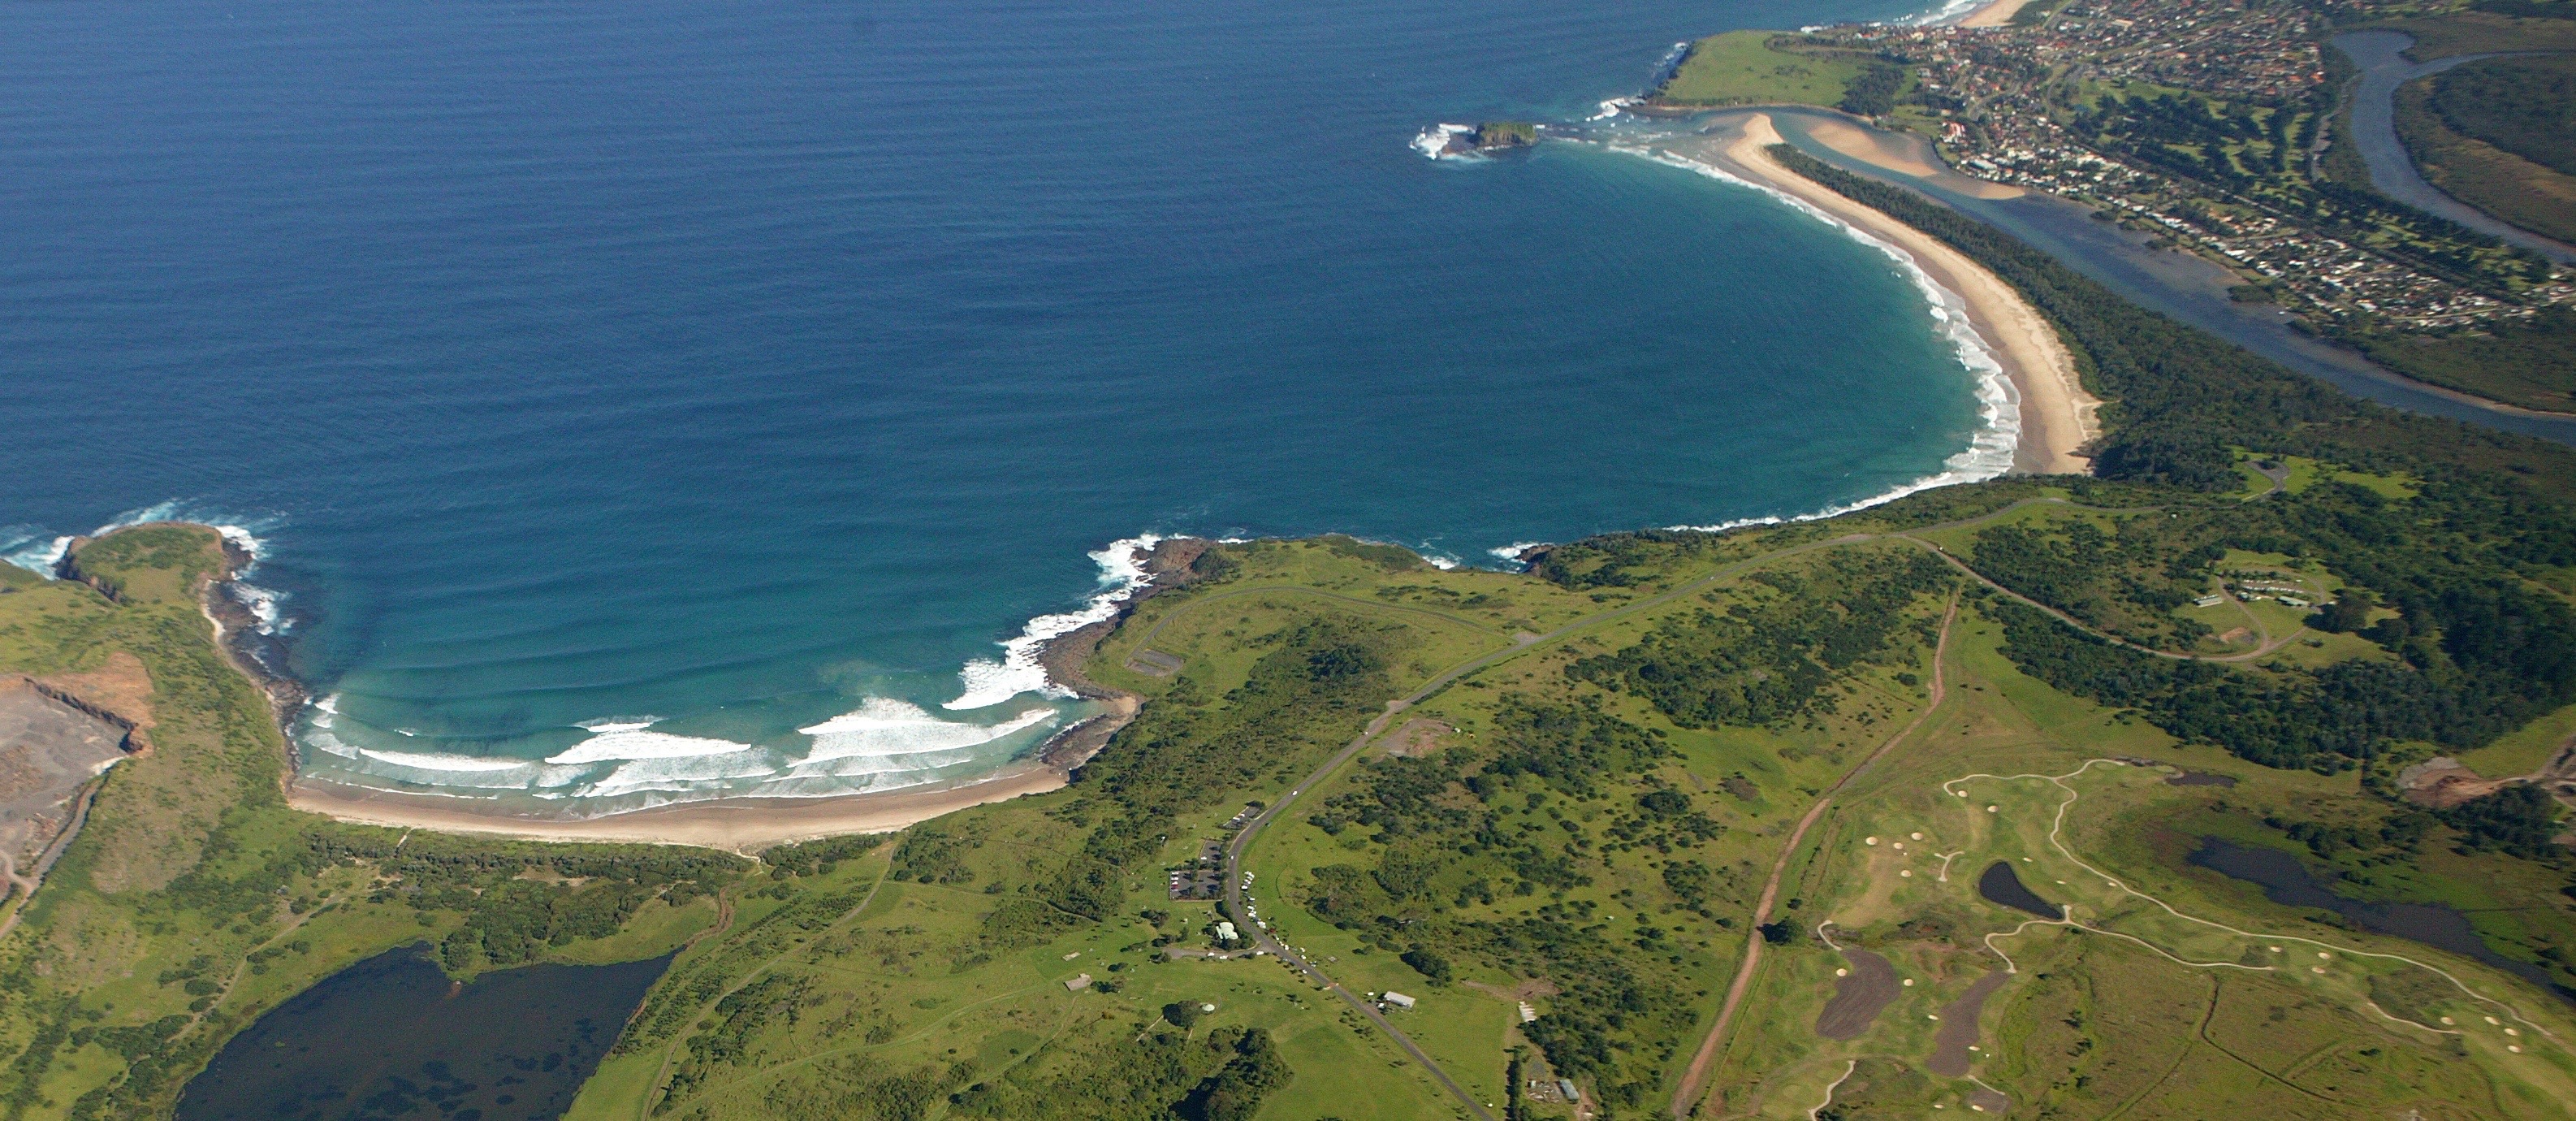 Aerial view of the coastline with deep blue sea, white sandy beaches, some rocky areas and then grassy land behind the beach.